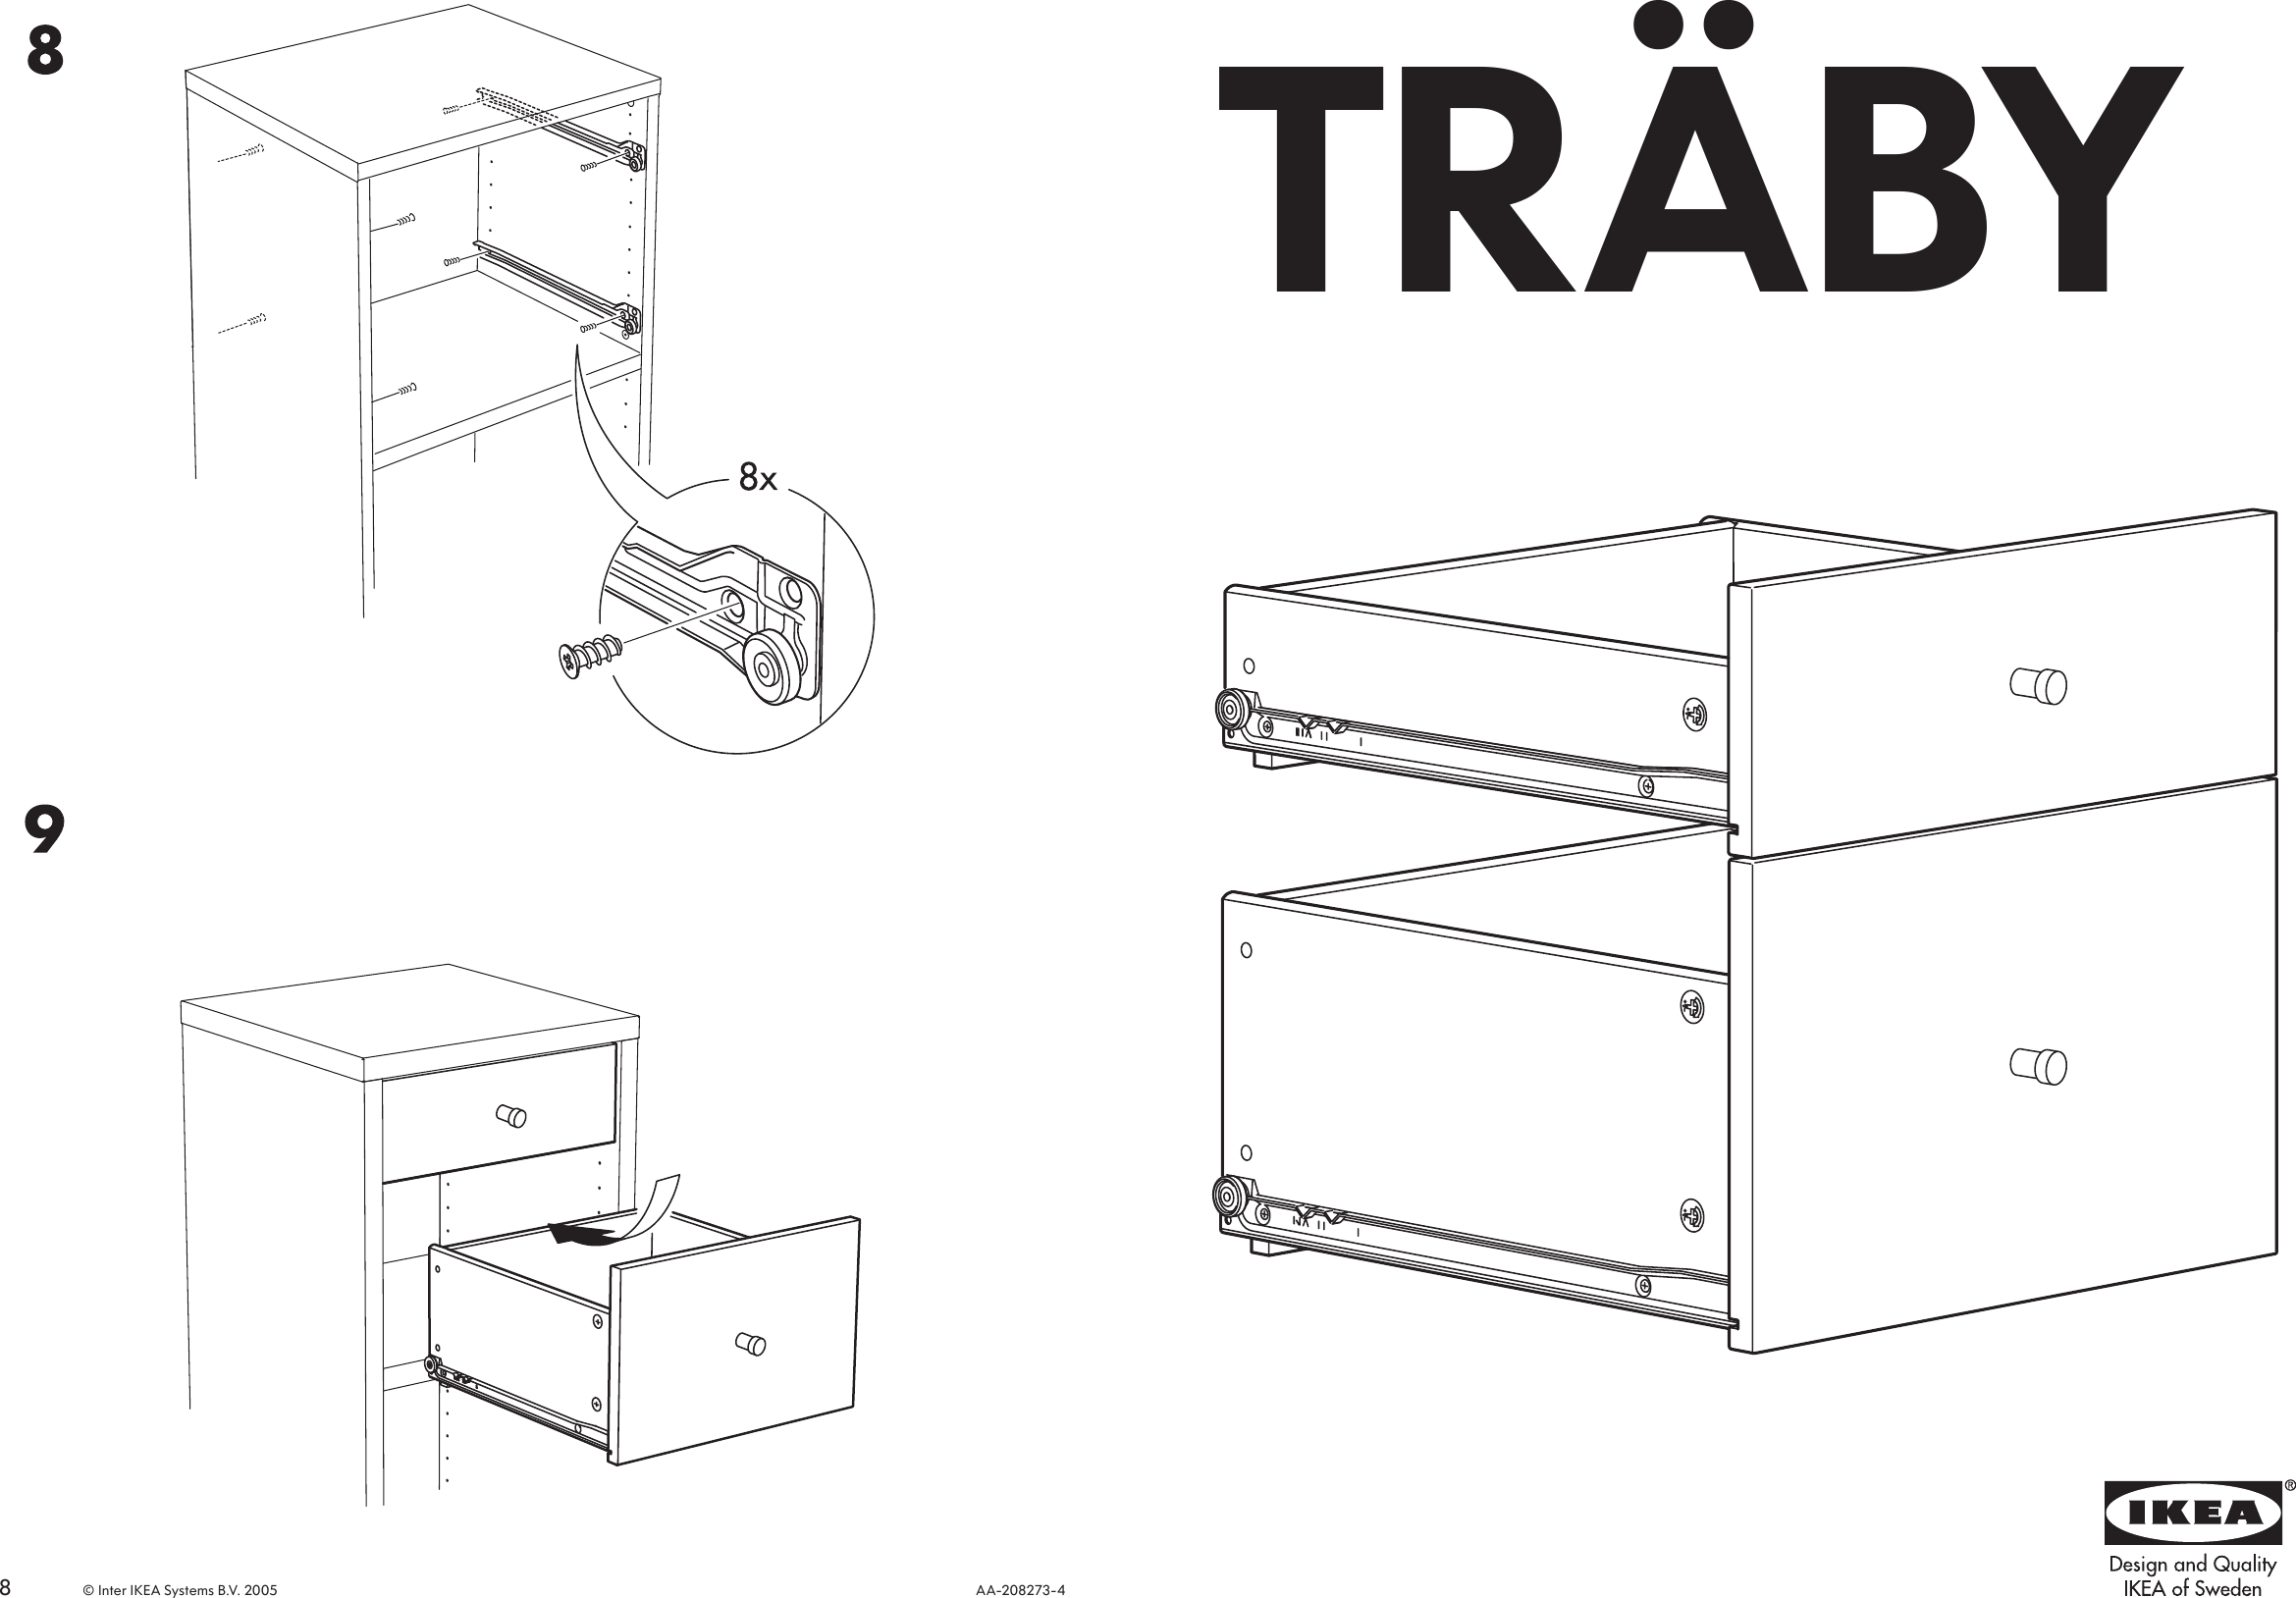 Ikea Traby Drawer 13 3 4 2Pk Assembly Instruction